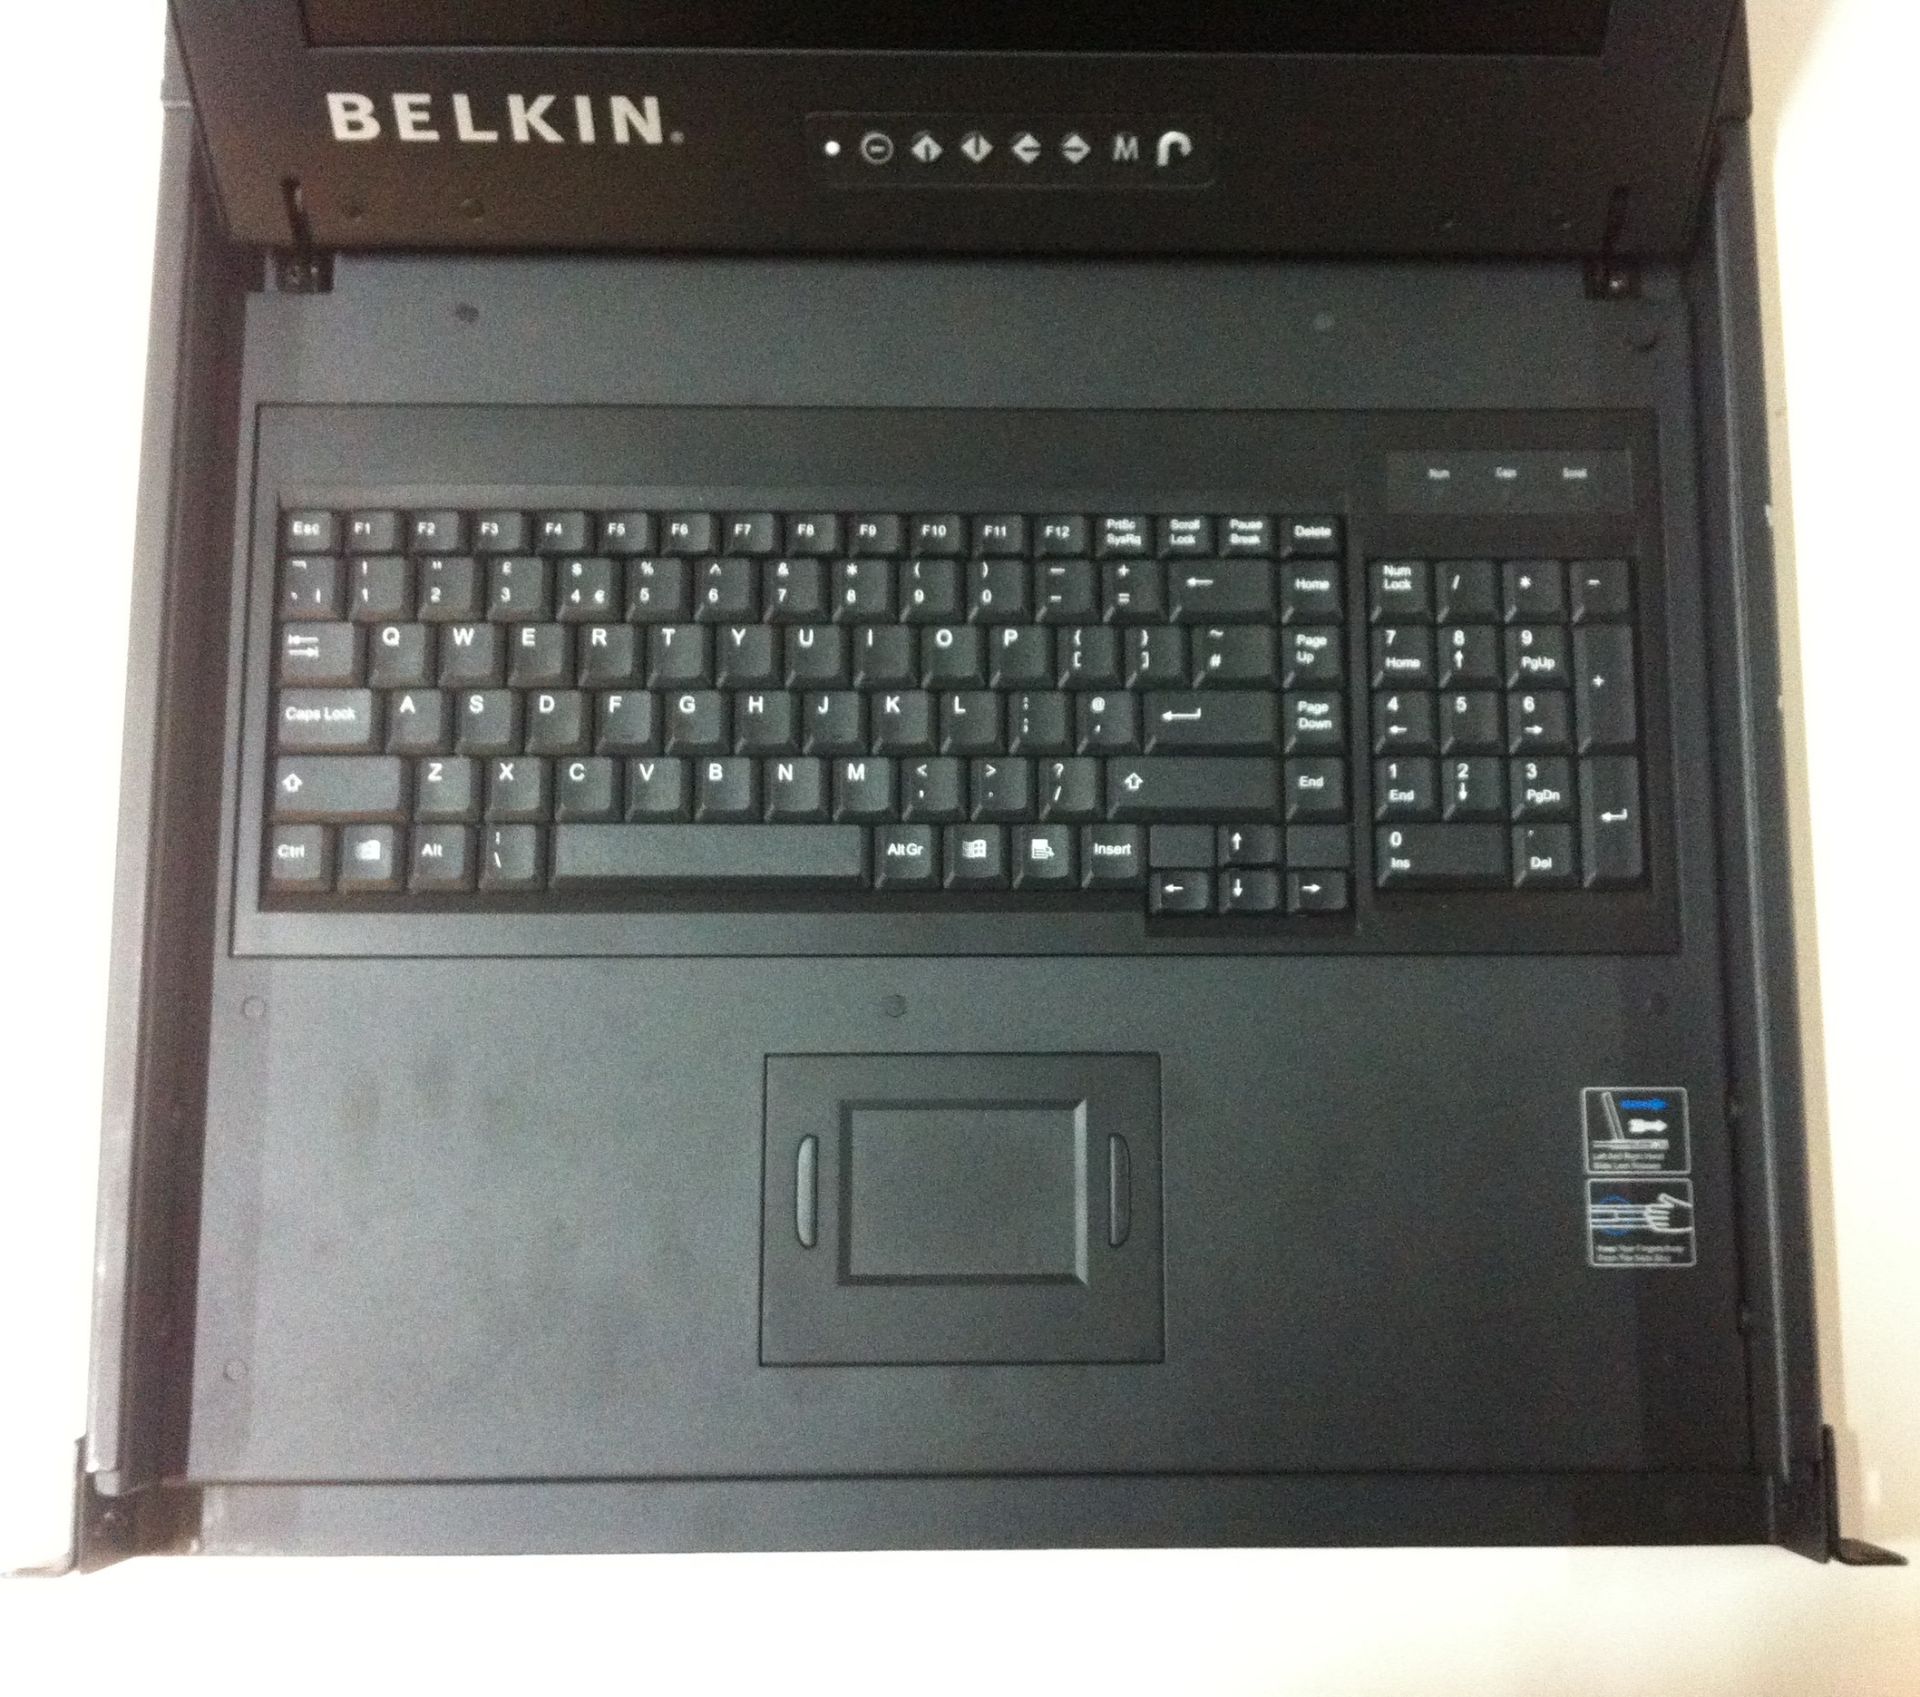 Belkin 17" LCD Rack Console with 8 Port KVM Switch - Image 3 of 5